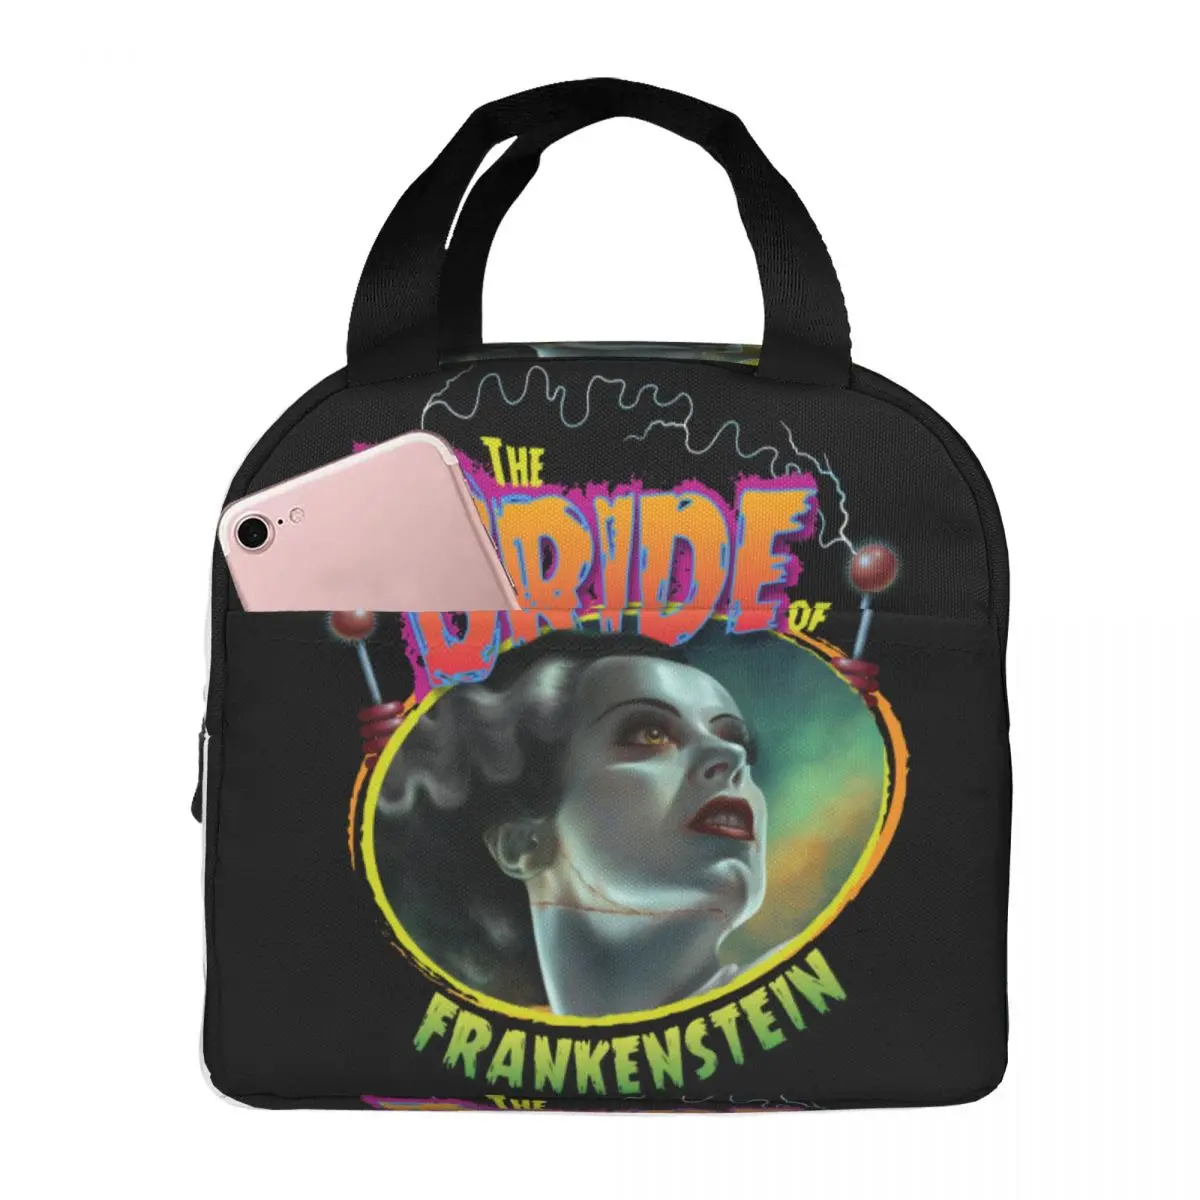 Lunch Bag for Women Kids The Bride Of Frankenstein Insulated Cooler Bag Waterproof Picnic Travel Horror Lunch Box Handbags